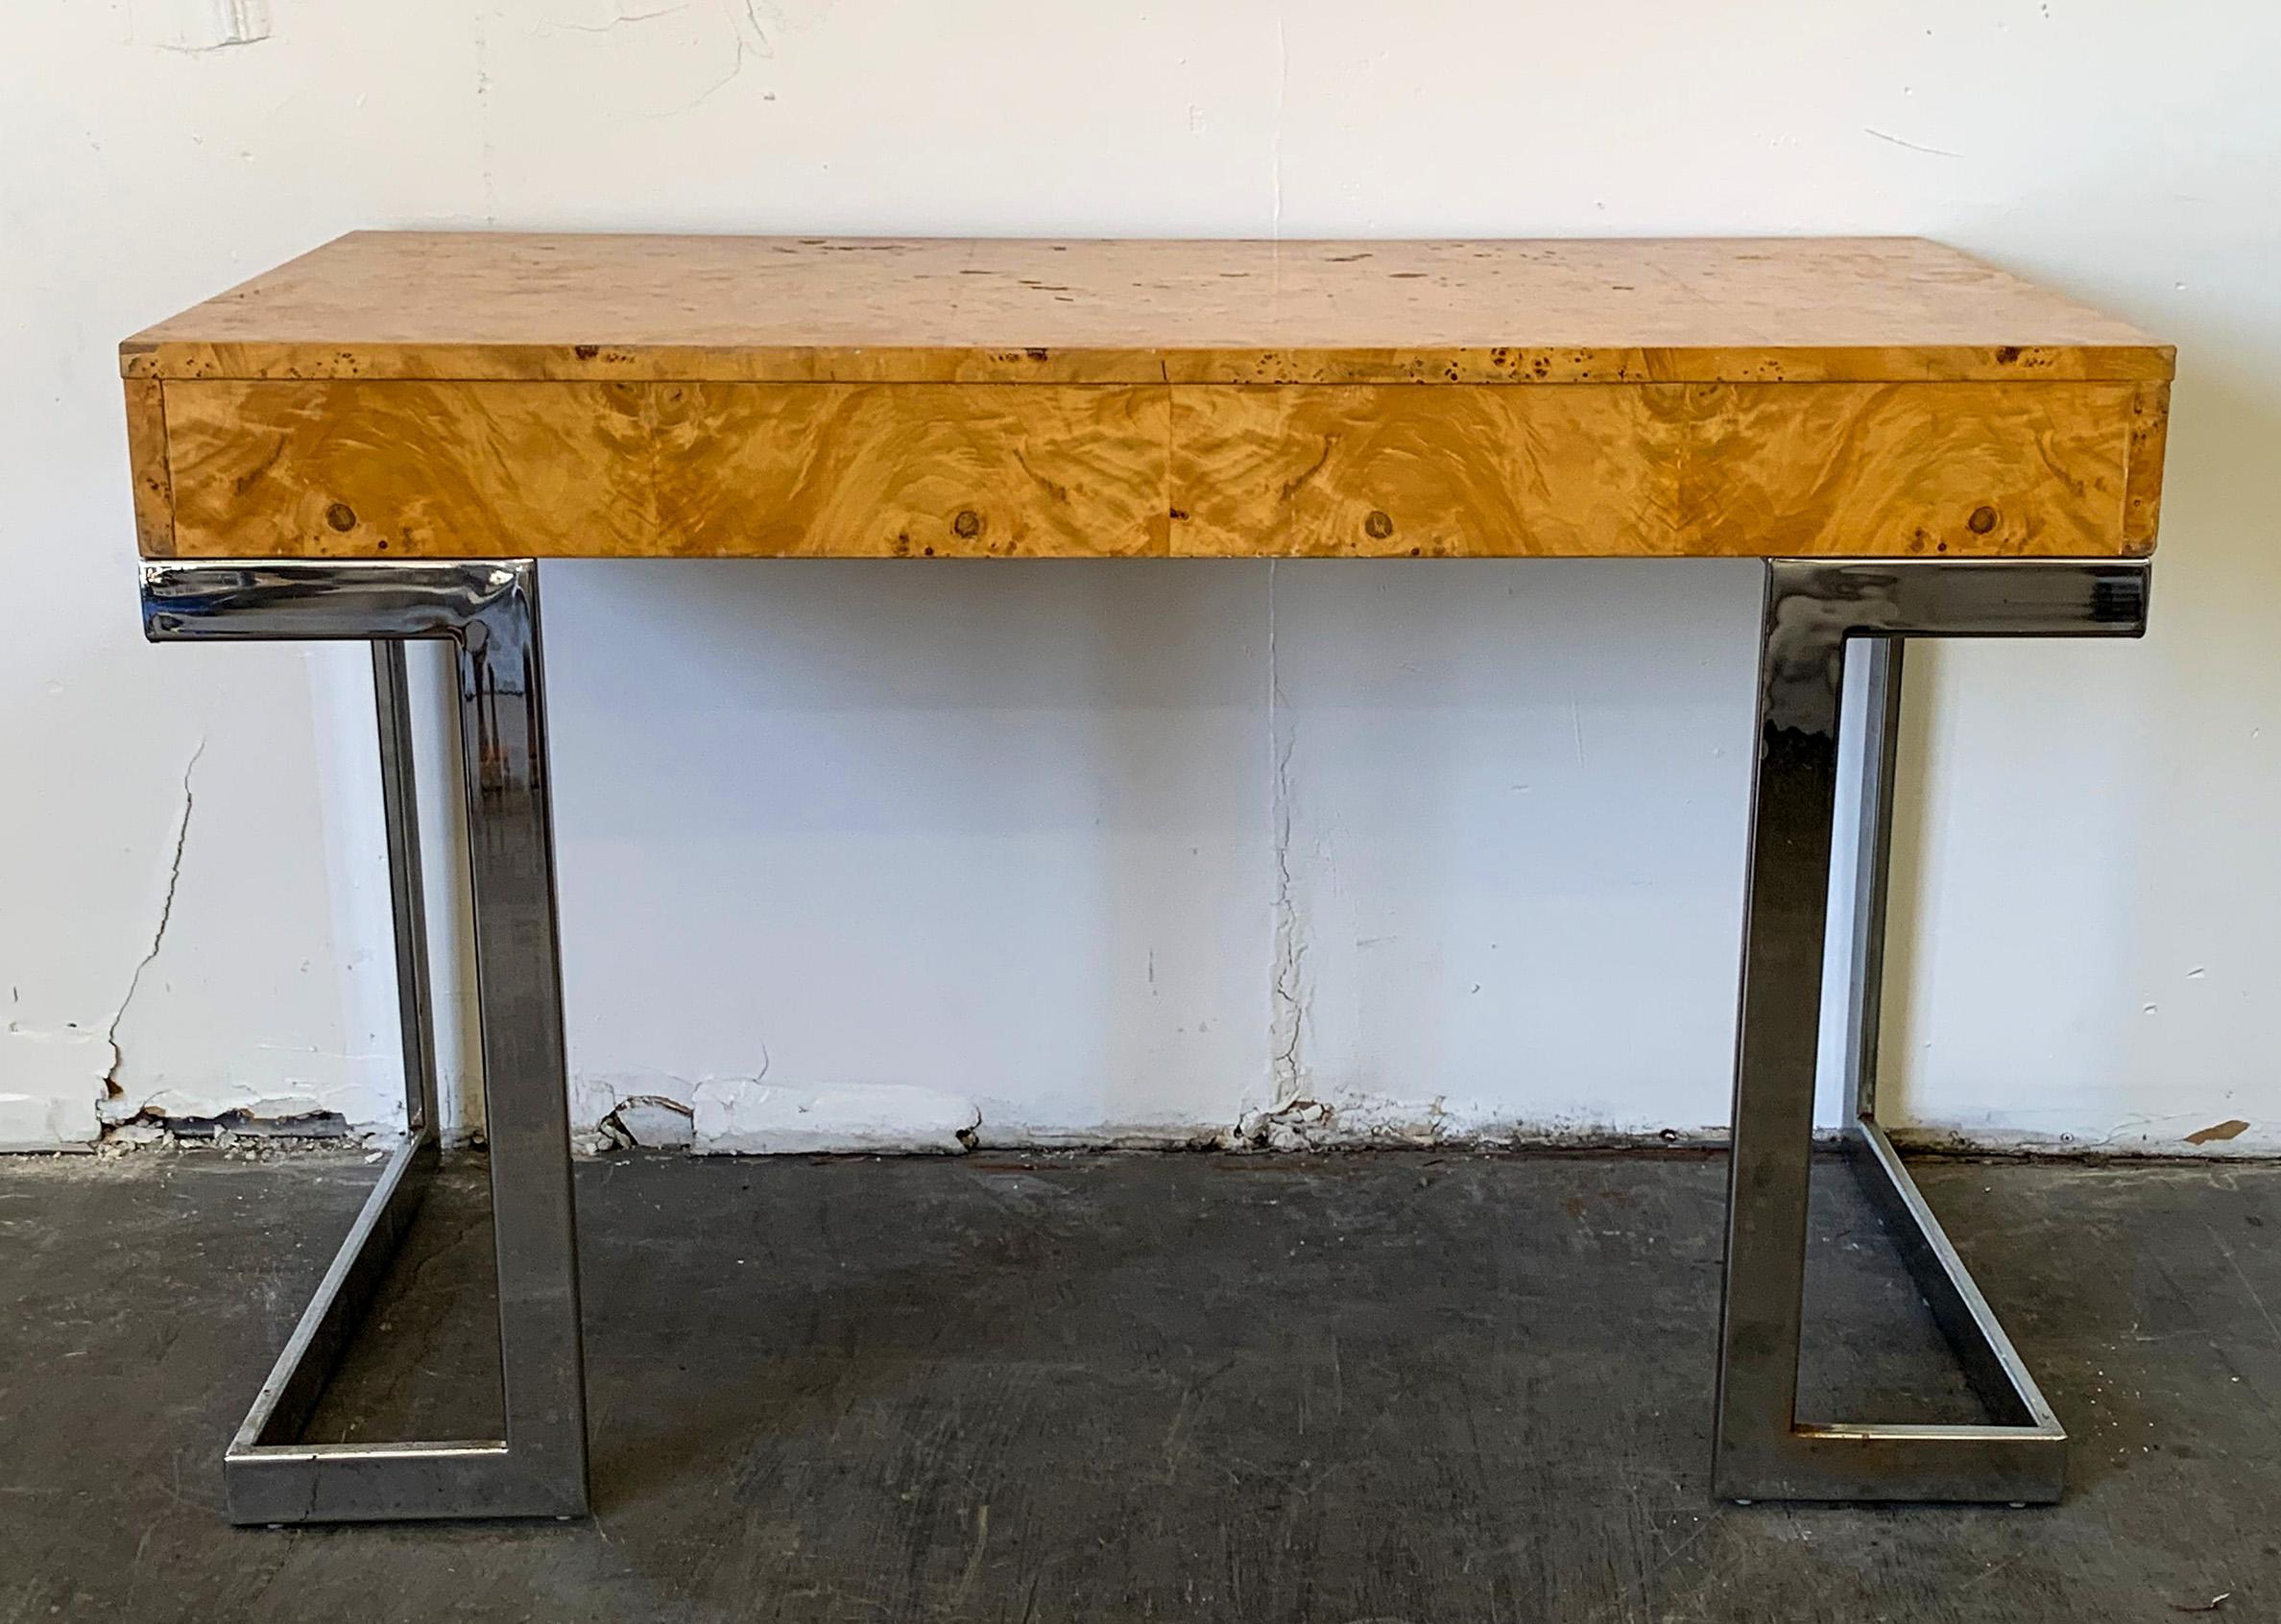 Available right now I have this stunning Arthur Umanoff burl desk for Contemporary Shells, circa 1978. The desk features 2 drawers and a gorgeous chrome frame. This smaller desk features a little more storage than a traditional writing desk and